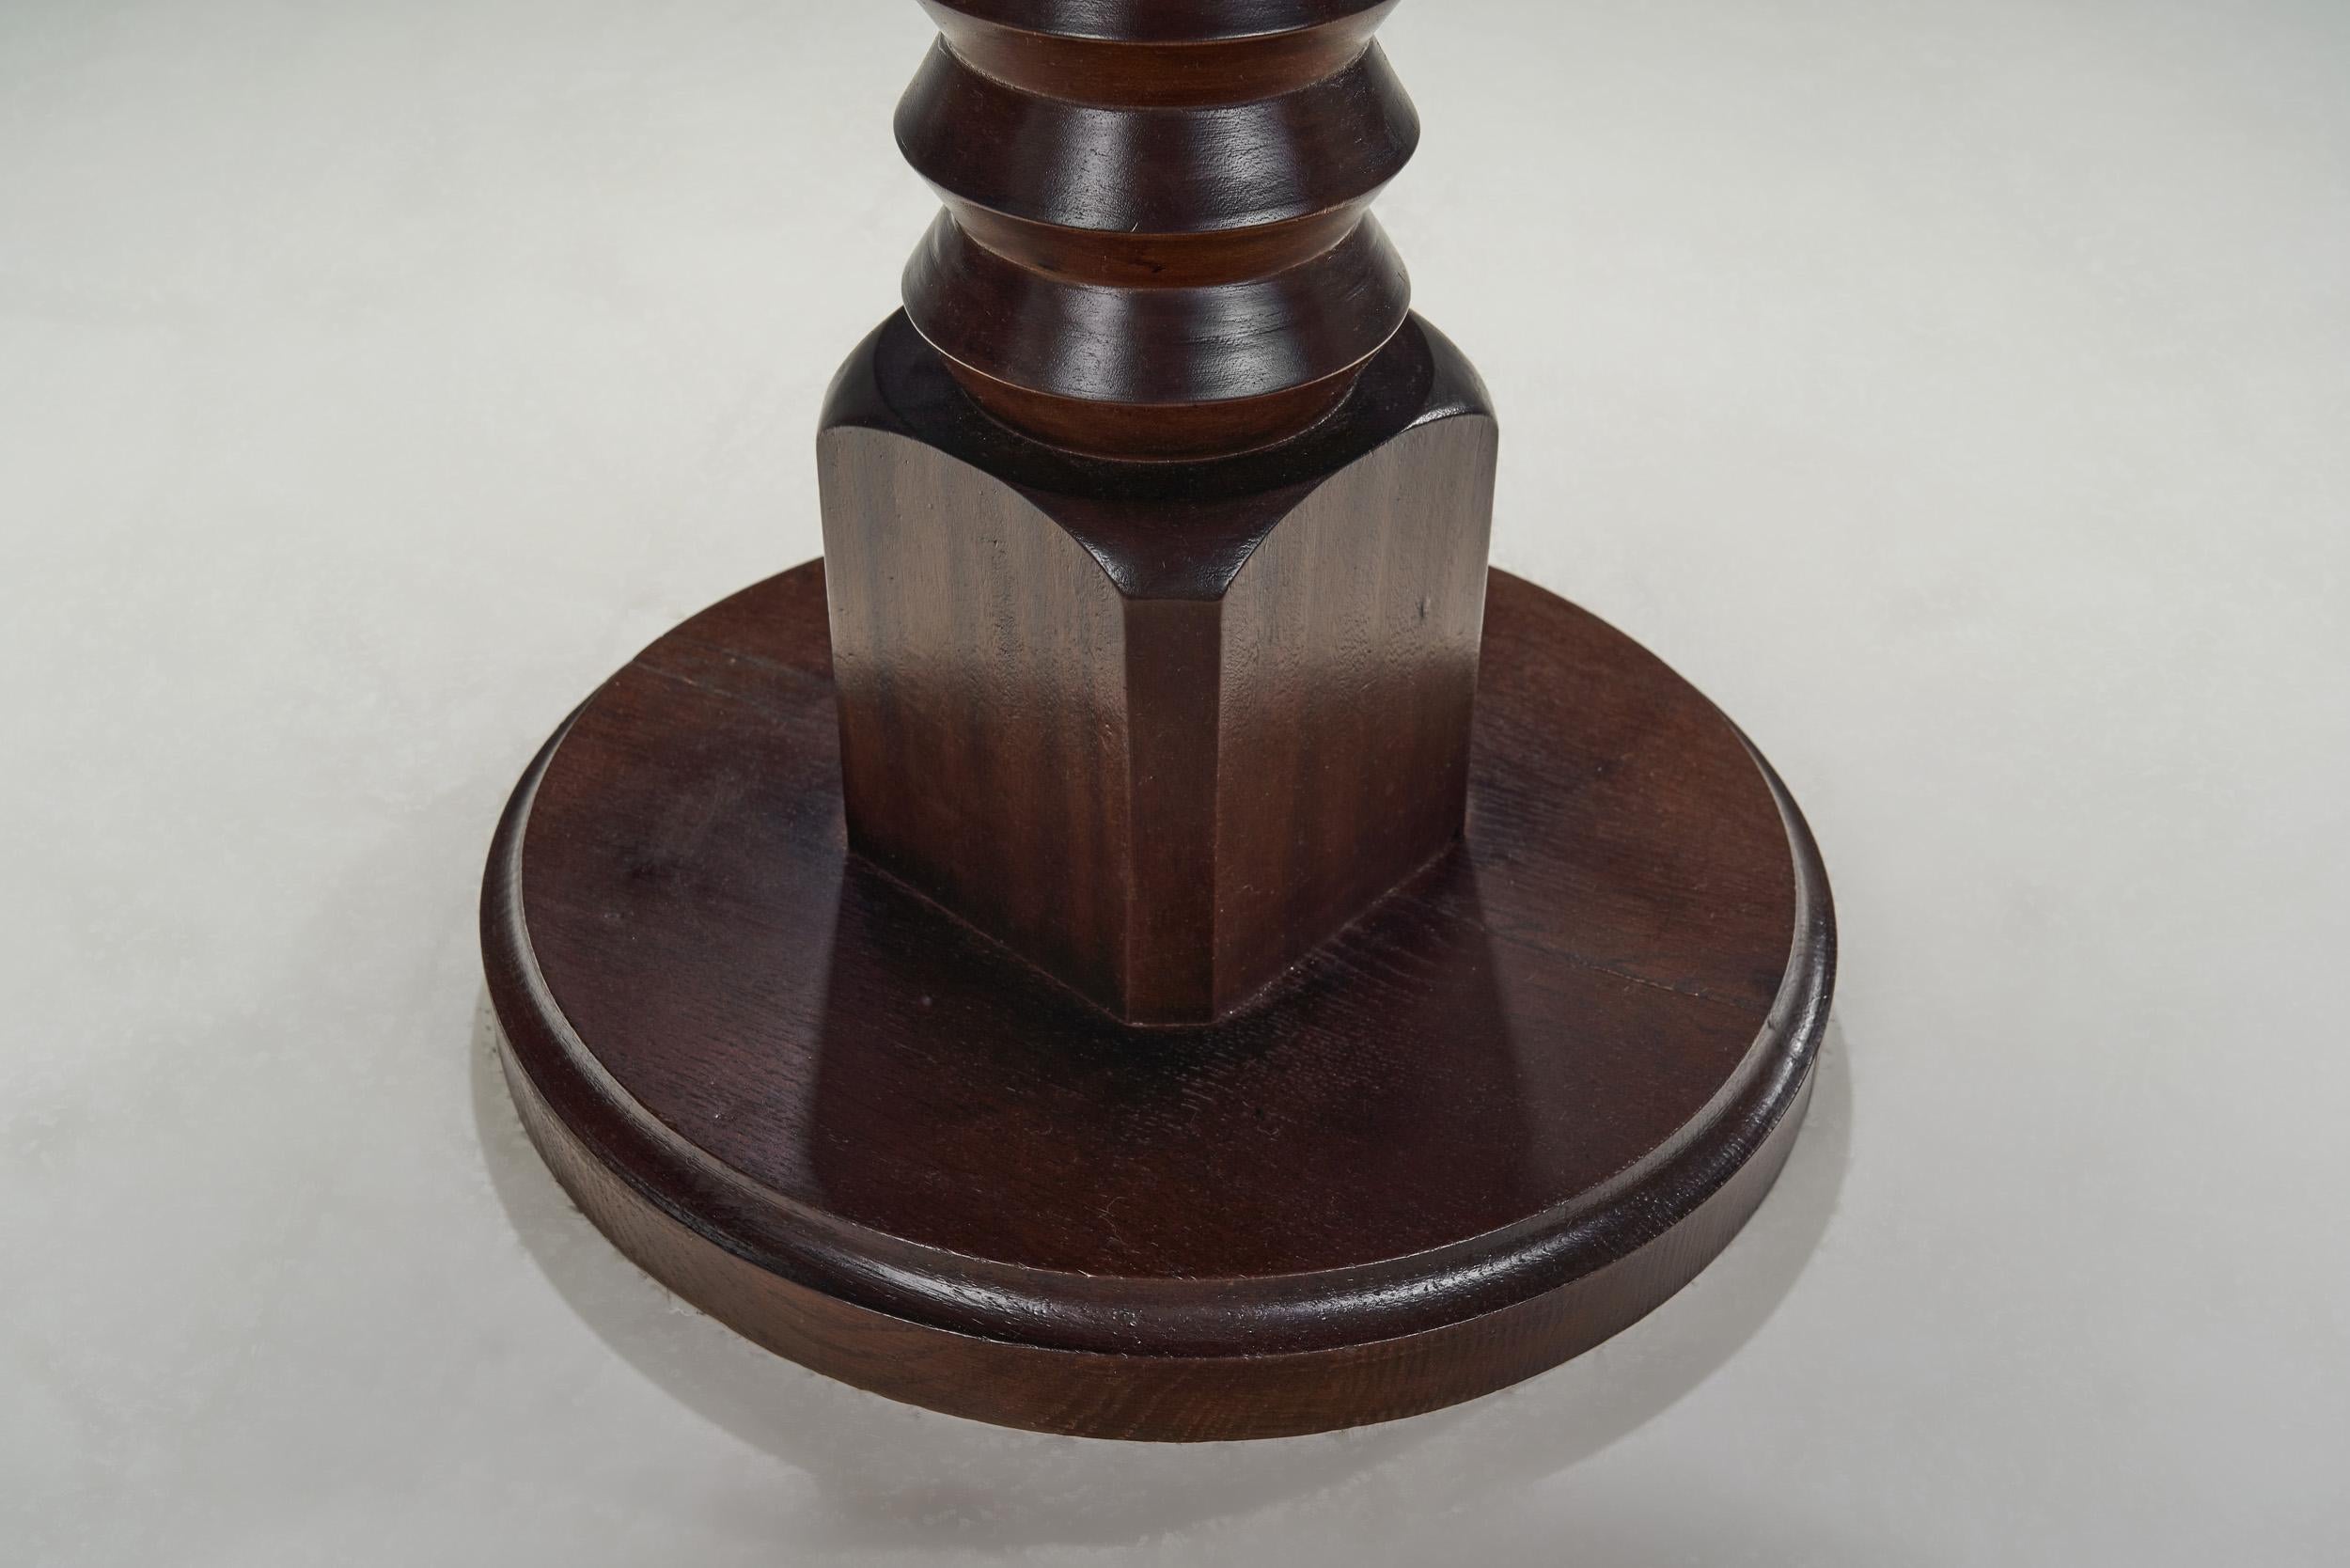 Sculptural Solid Wood Side Table with Column Base, Europe ca 1940s For Sale 6